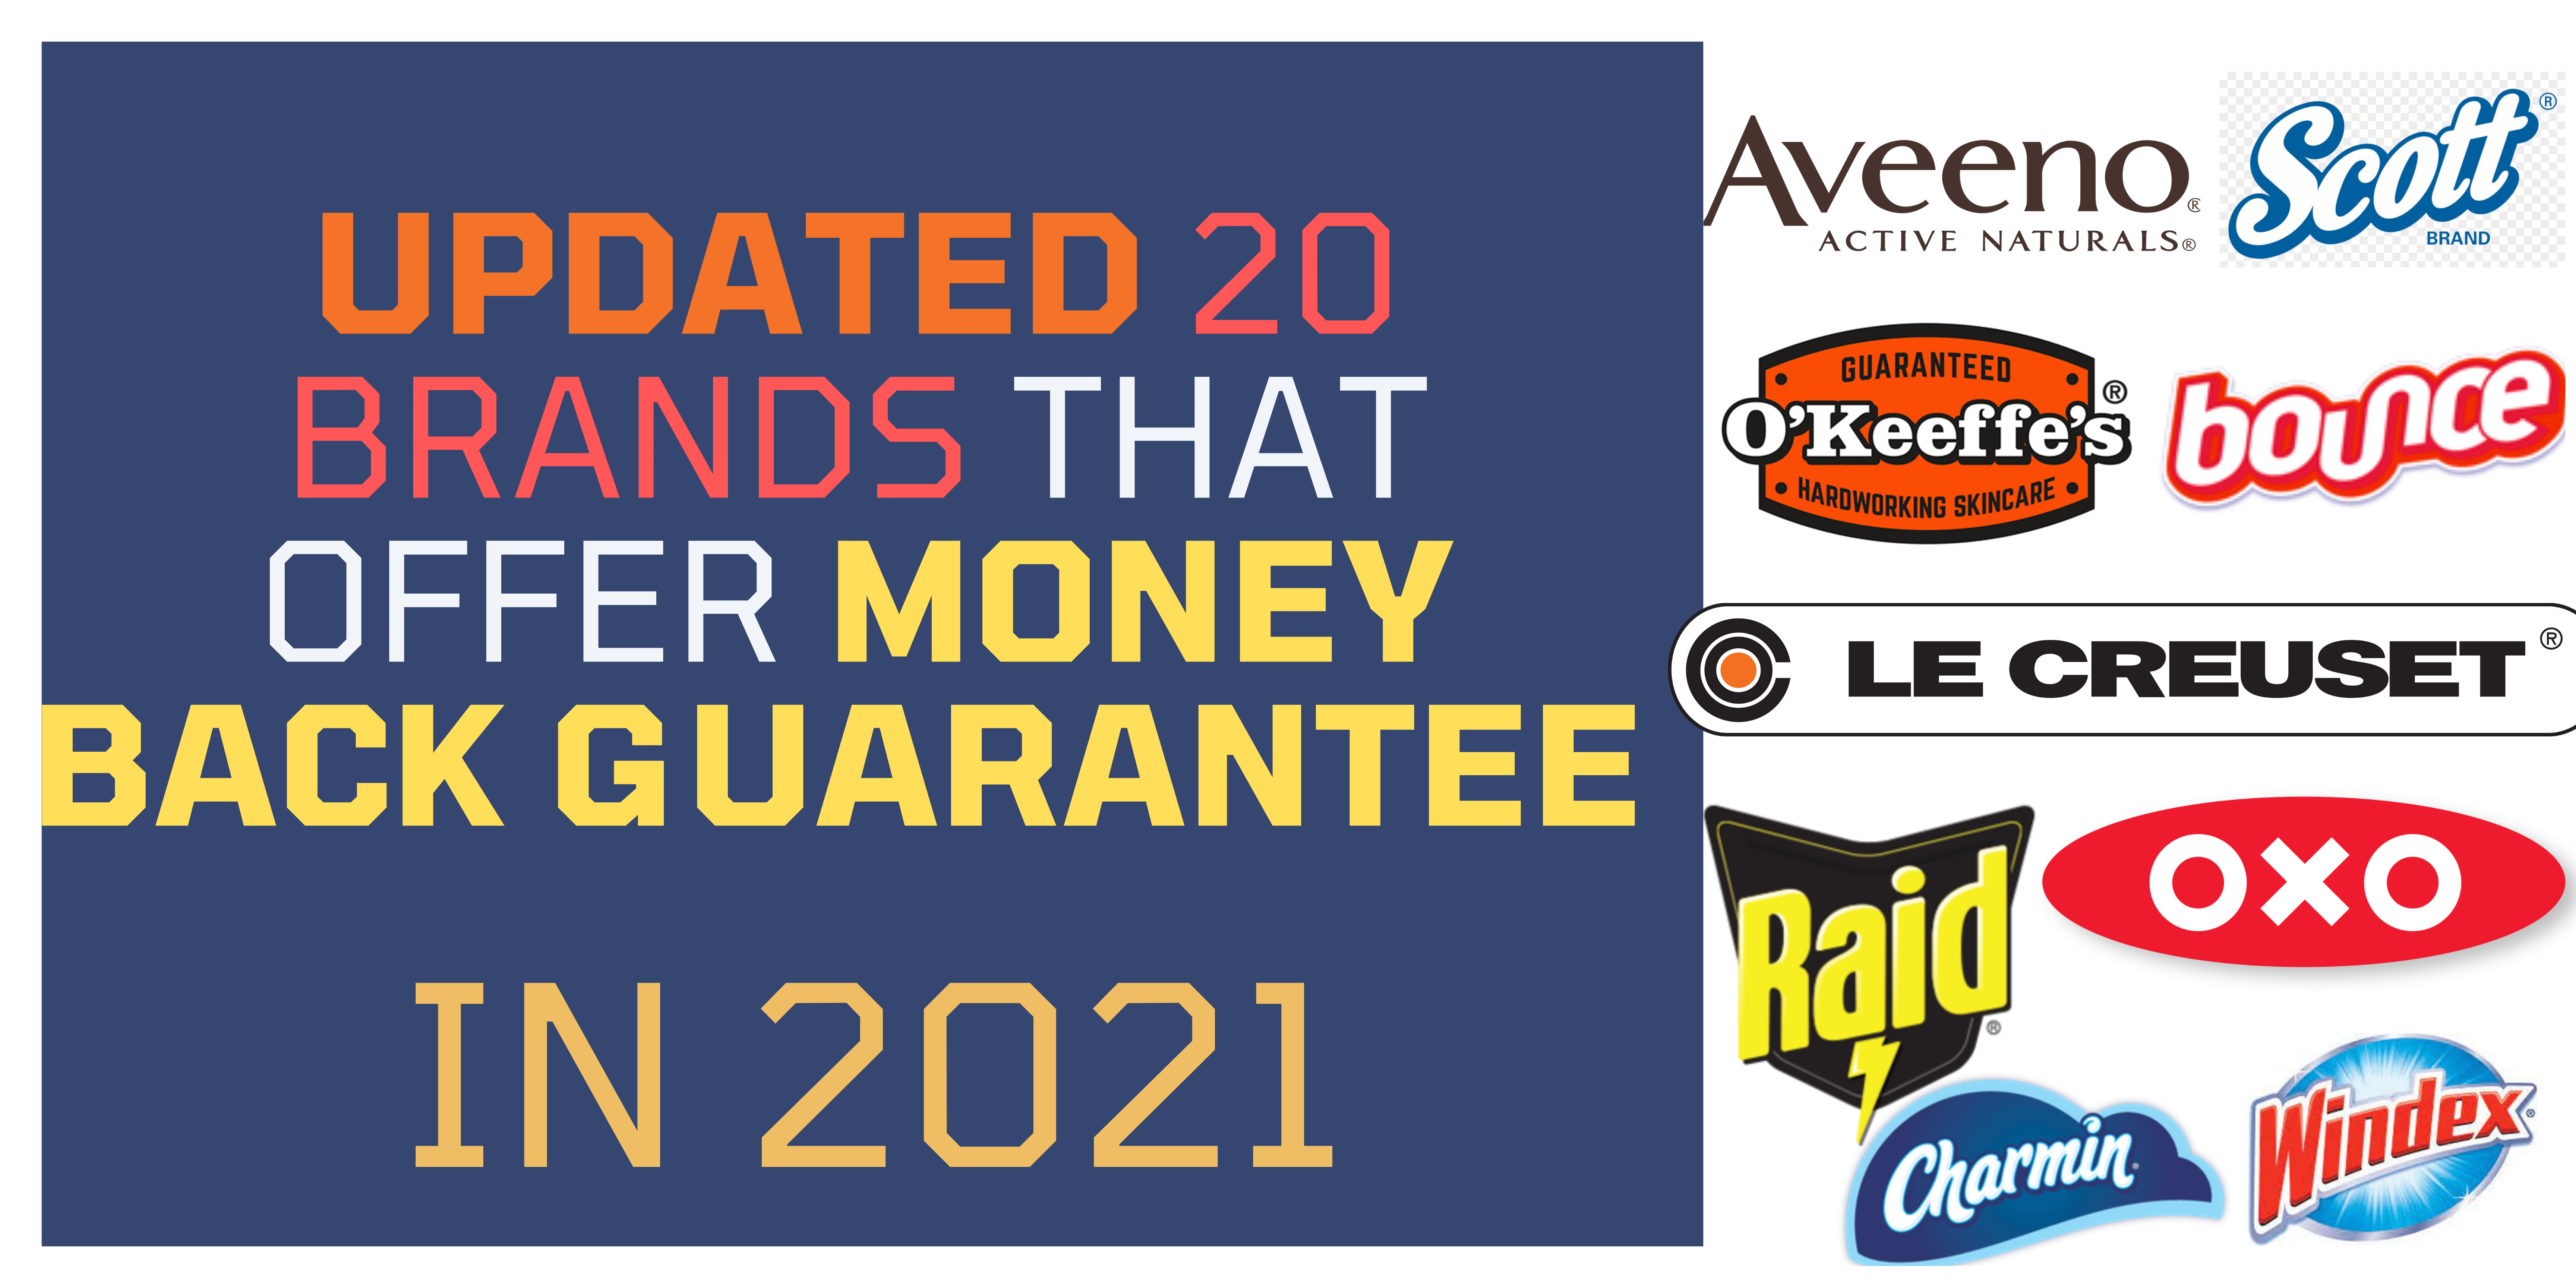 Updated 20 Brands that Offer Money Back Guarantee in 2021